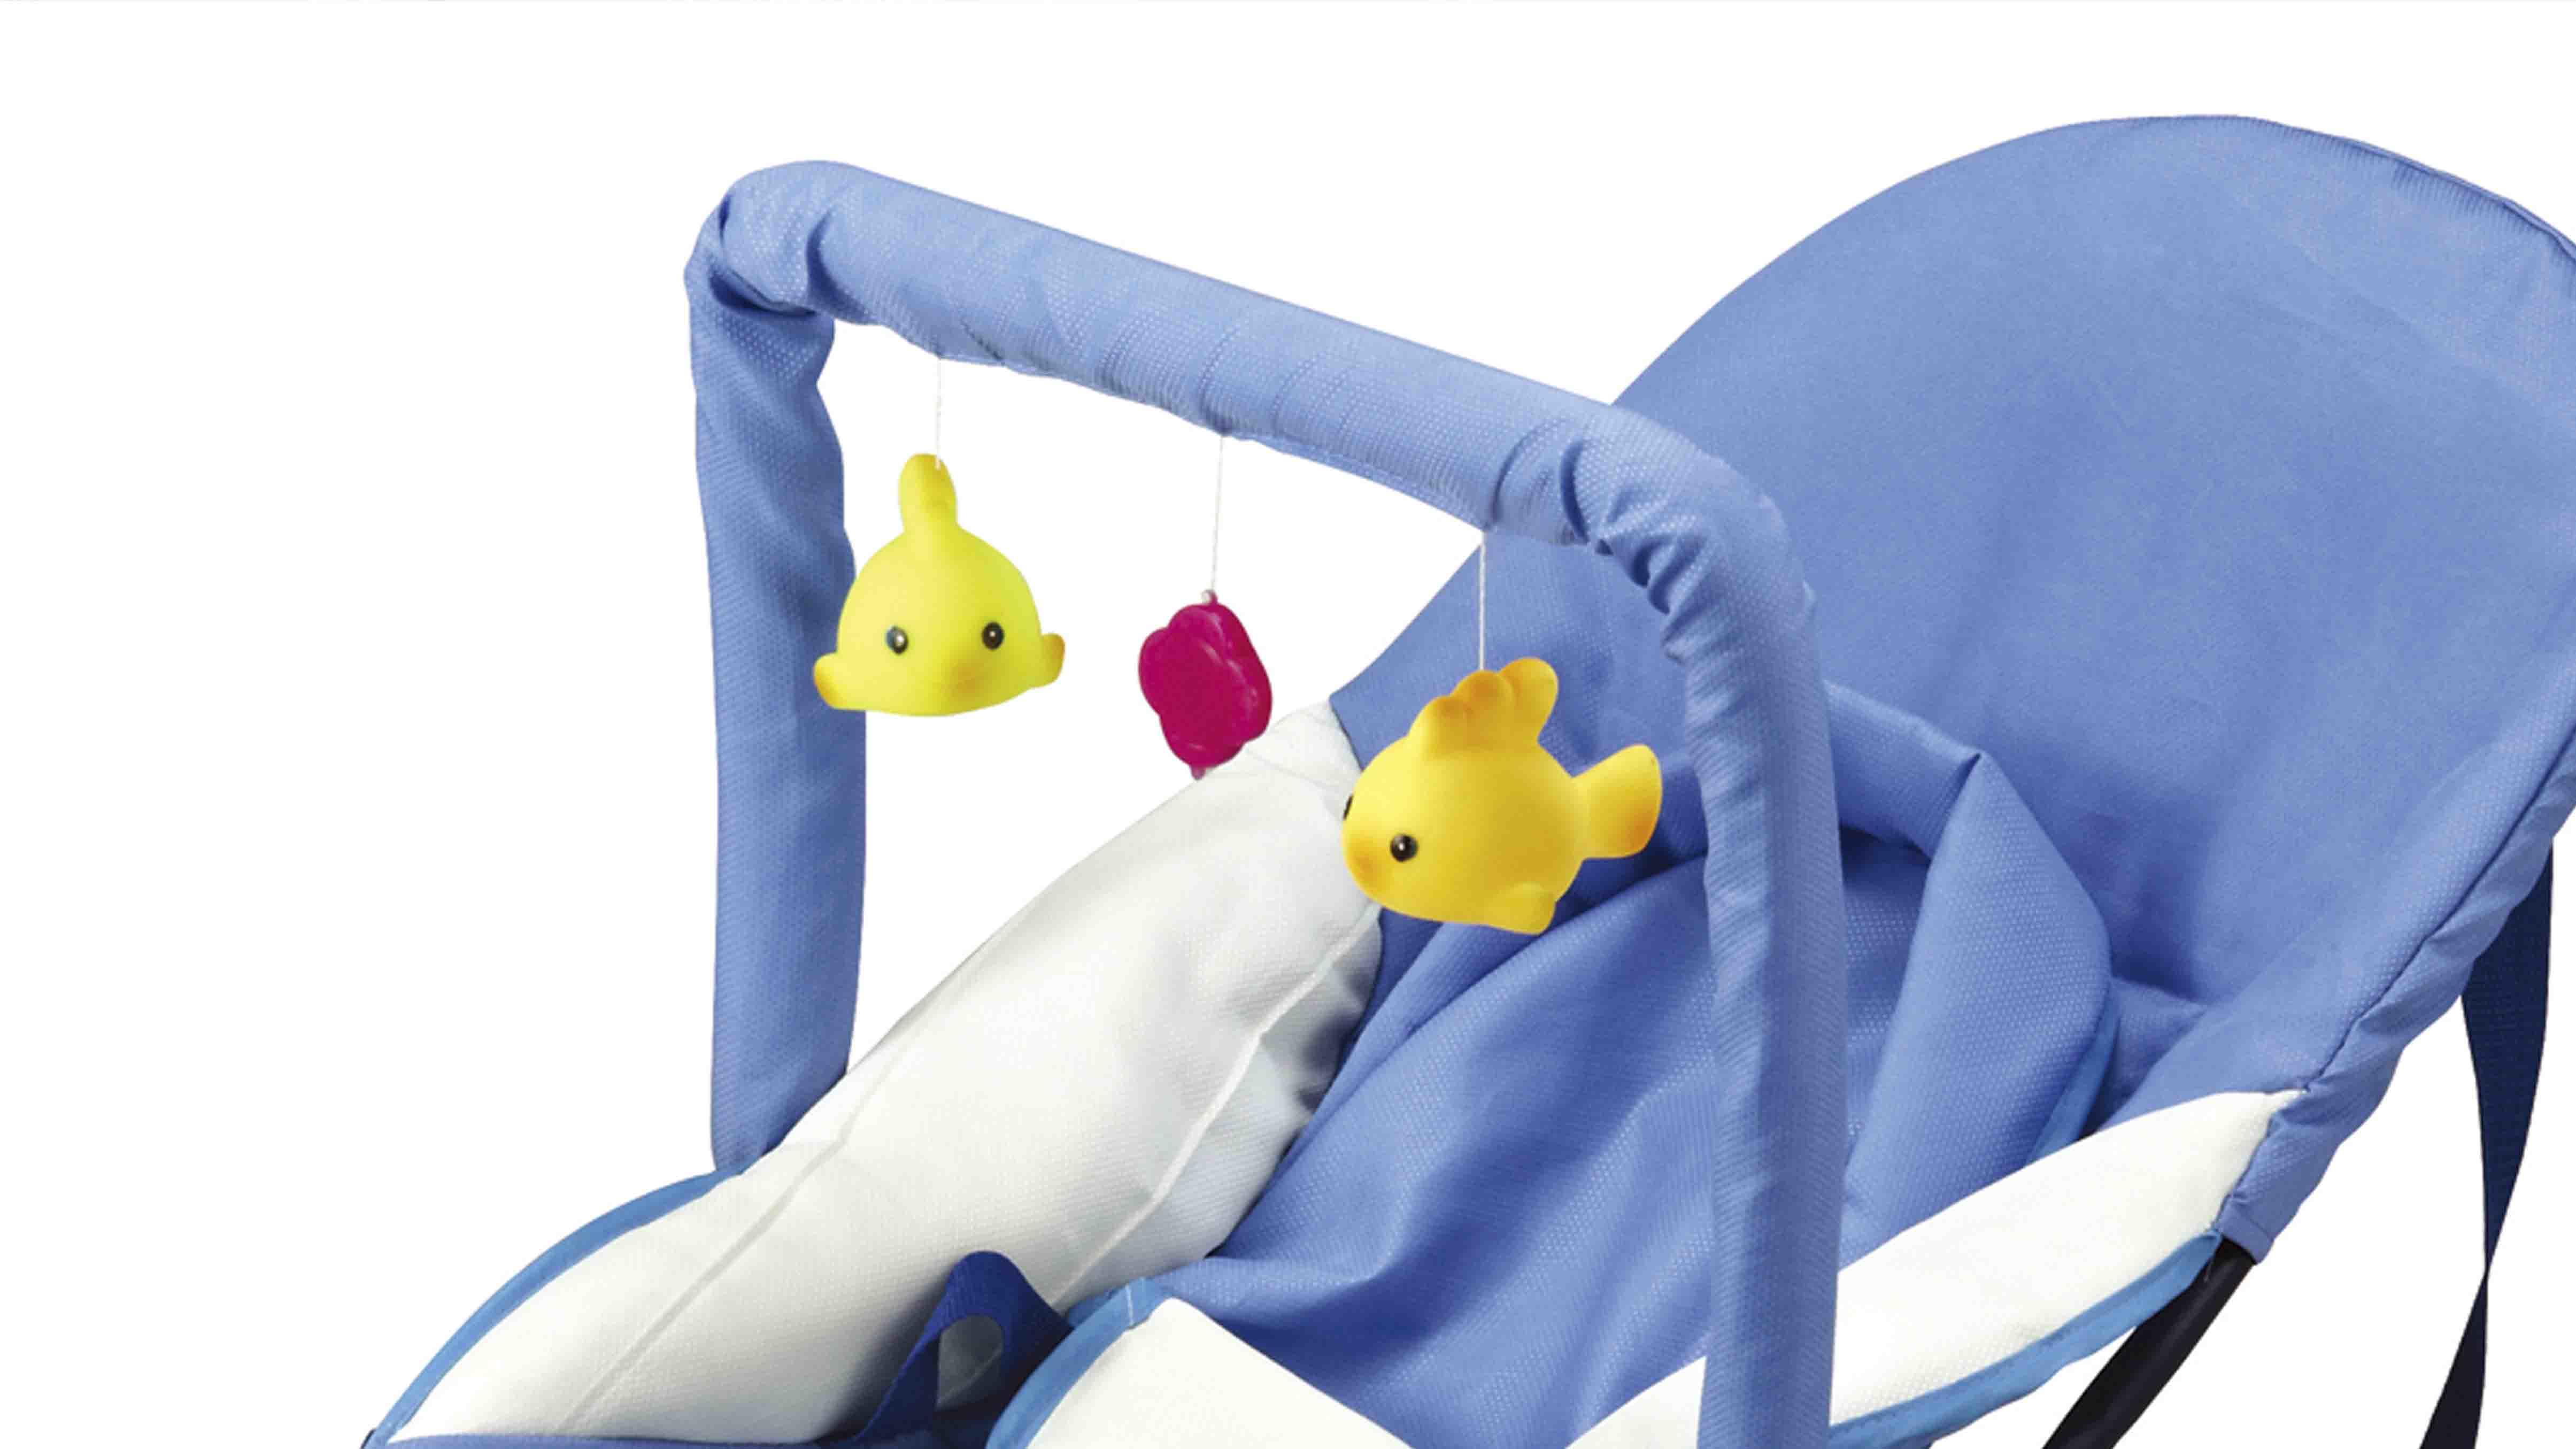 Foldable baby swing bouncer for baby rest and play 312-2